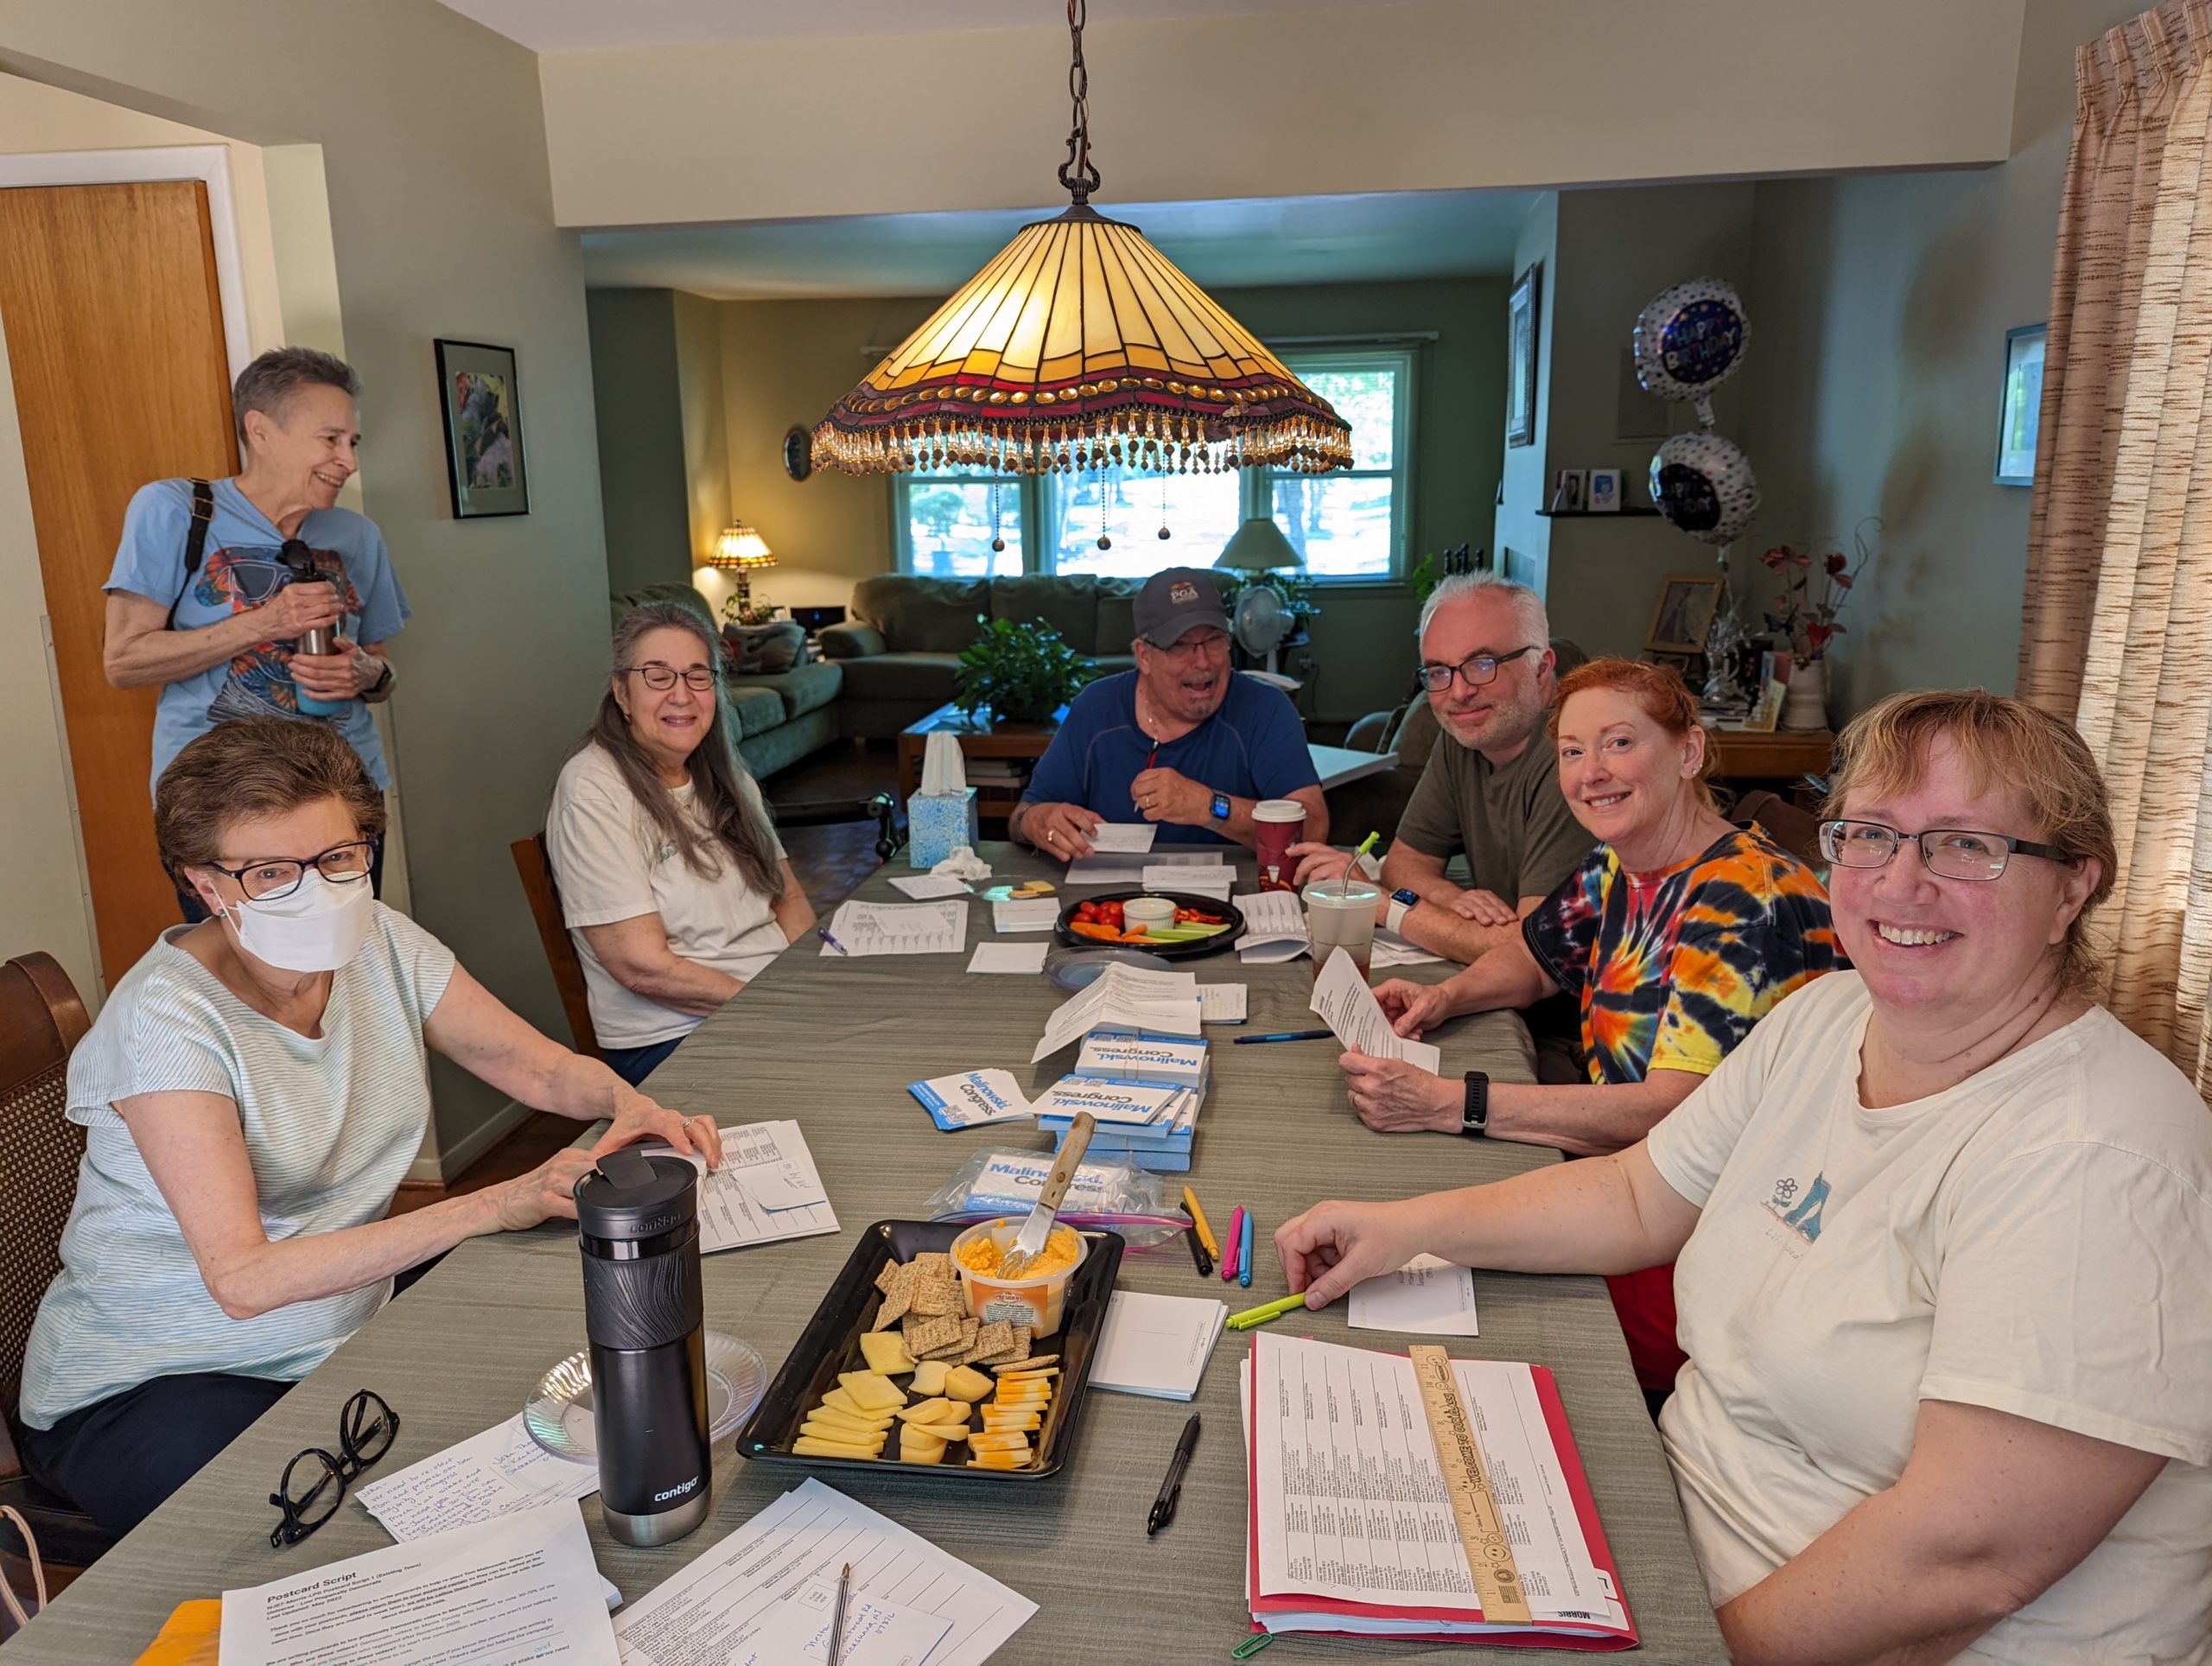 Postcard party for Malinowski for Congress May 2022